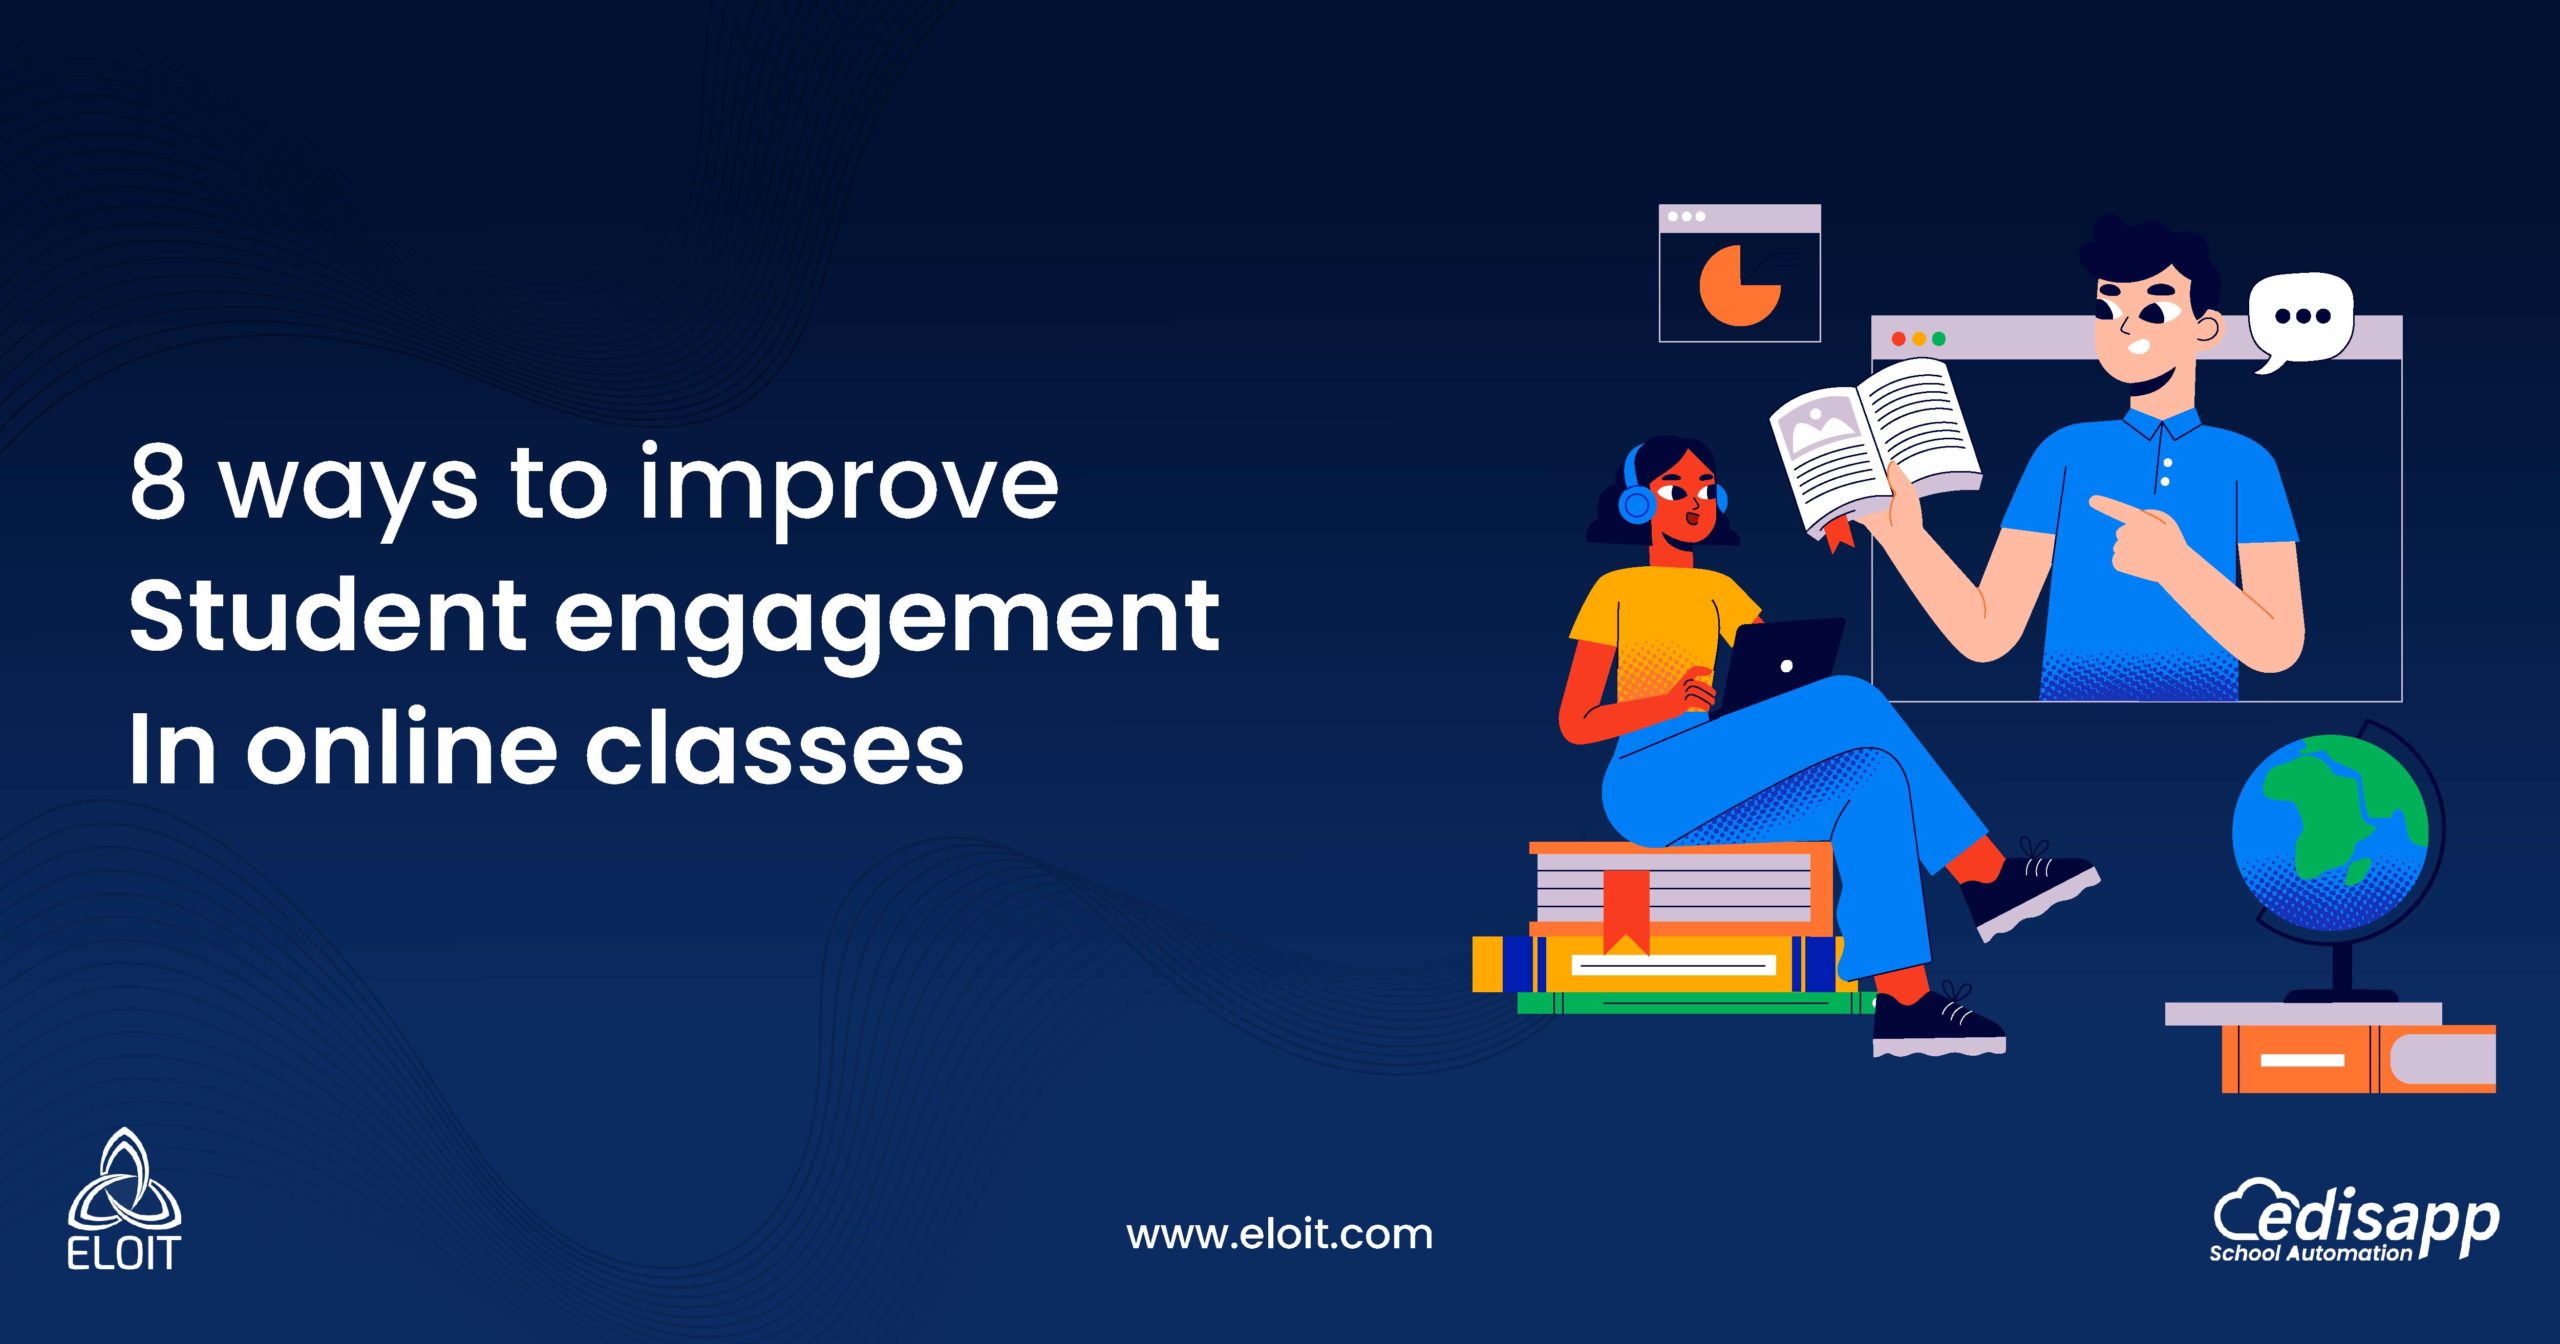 How to Improve Student Engagement in Online Classes